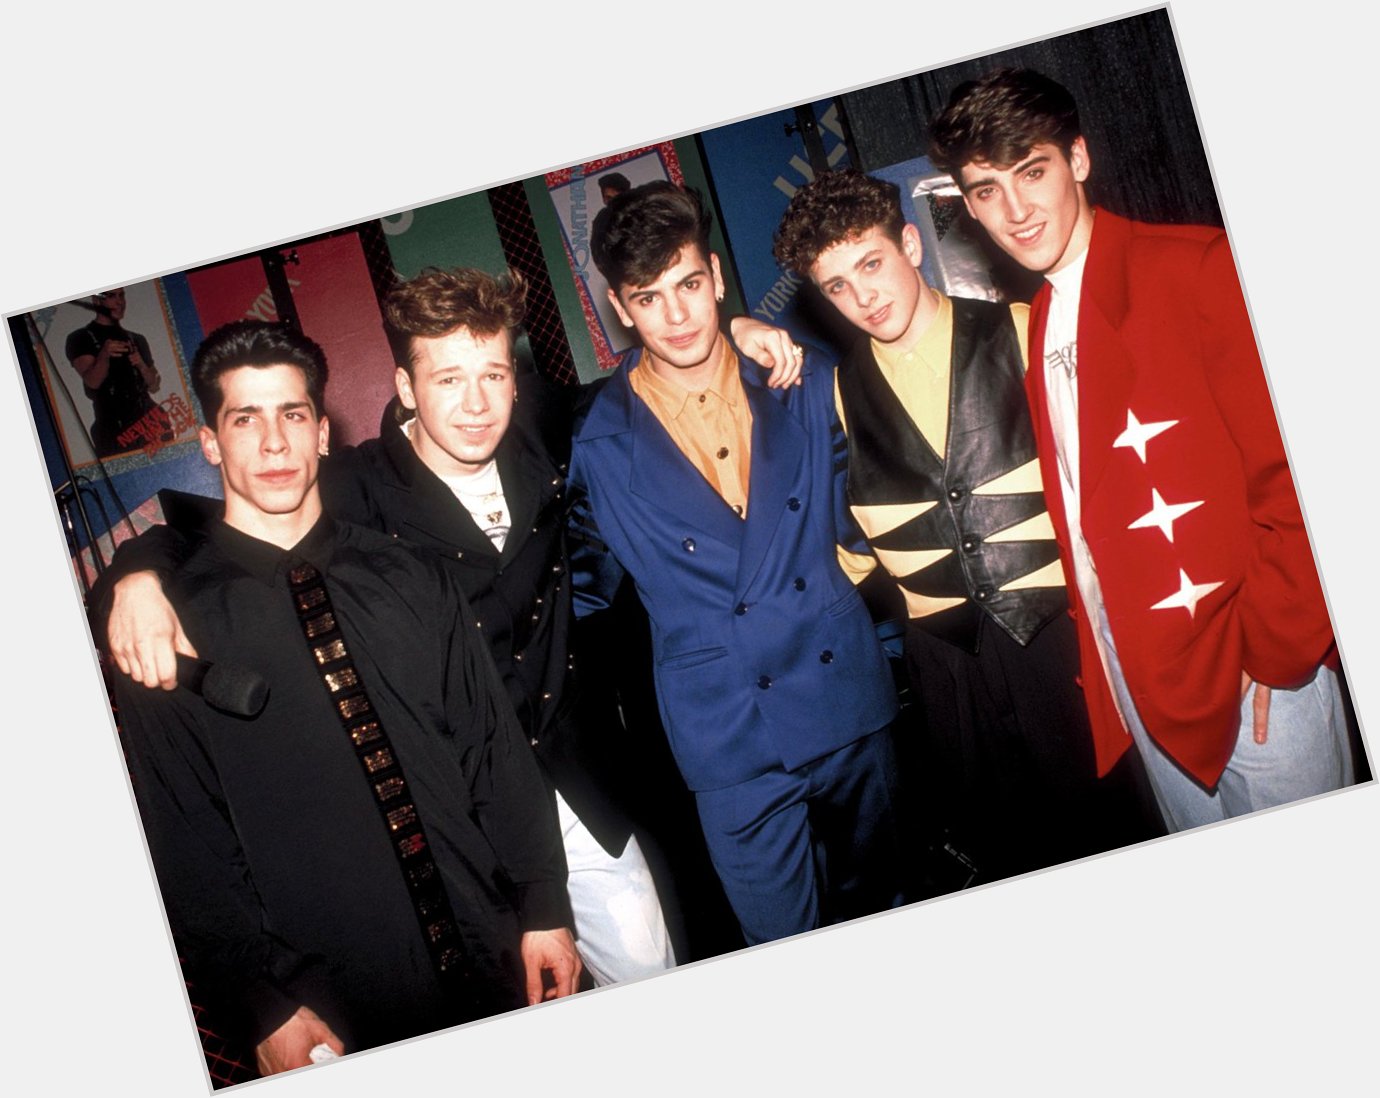 Happy Birthday to Joey McIntyre(second to right) who turns 45 today! 